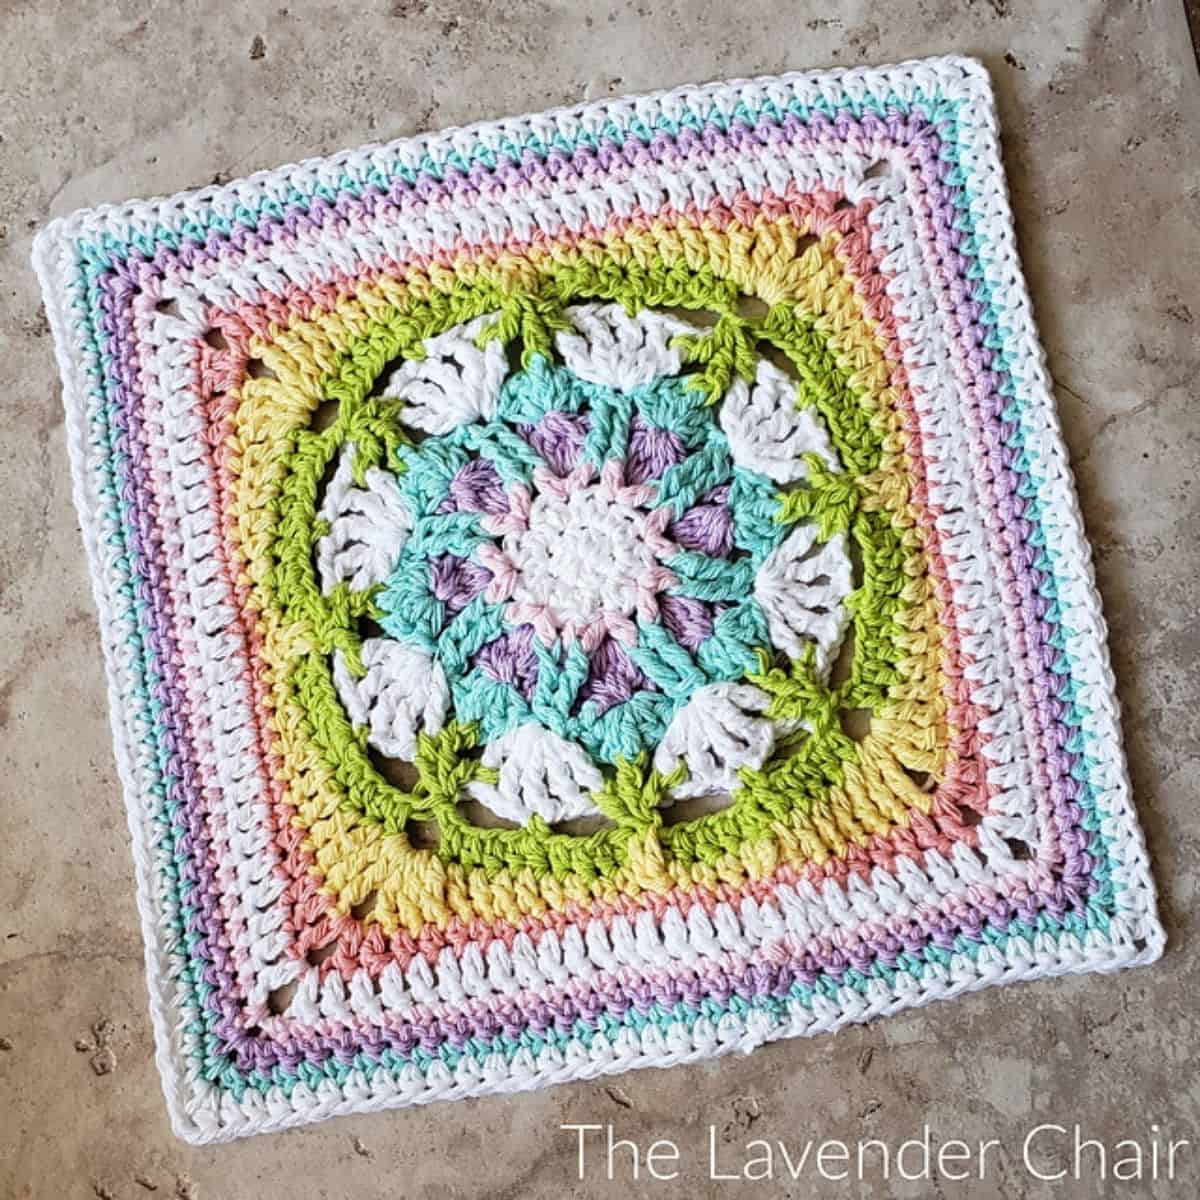 unusual crochet granny square that is colorful and has a subtle flower motif